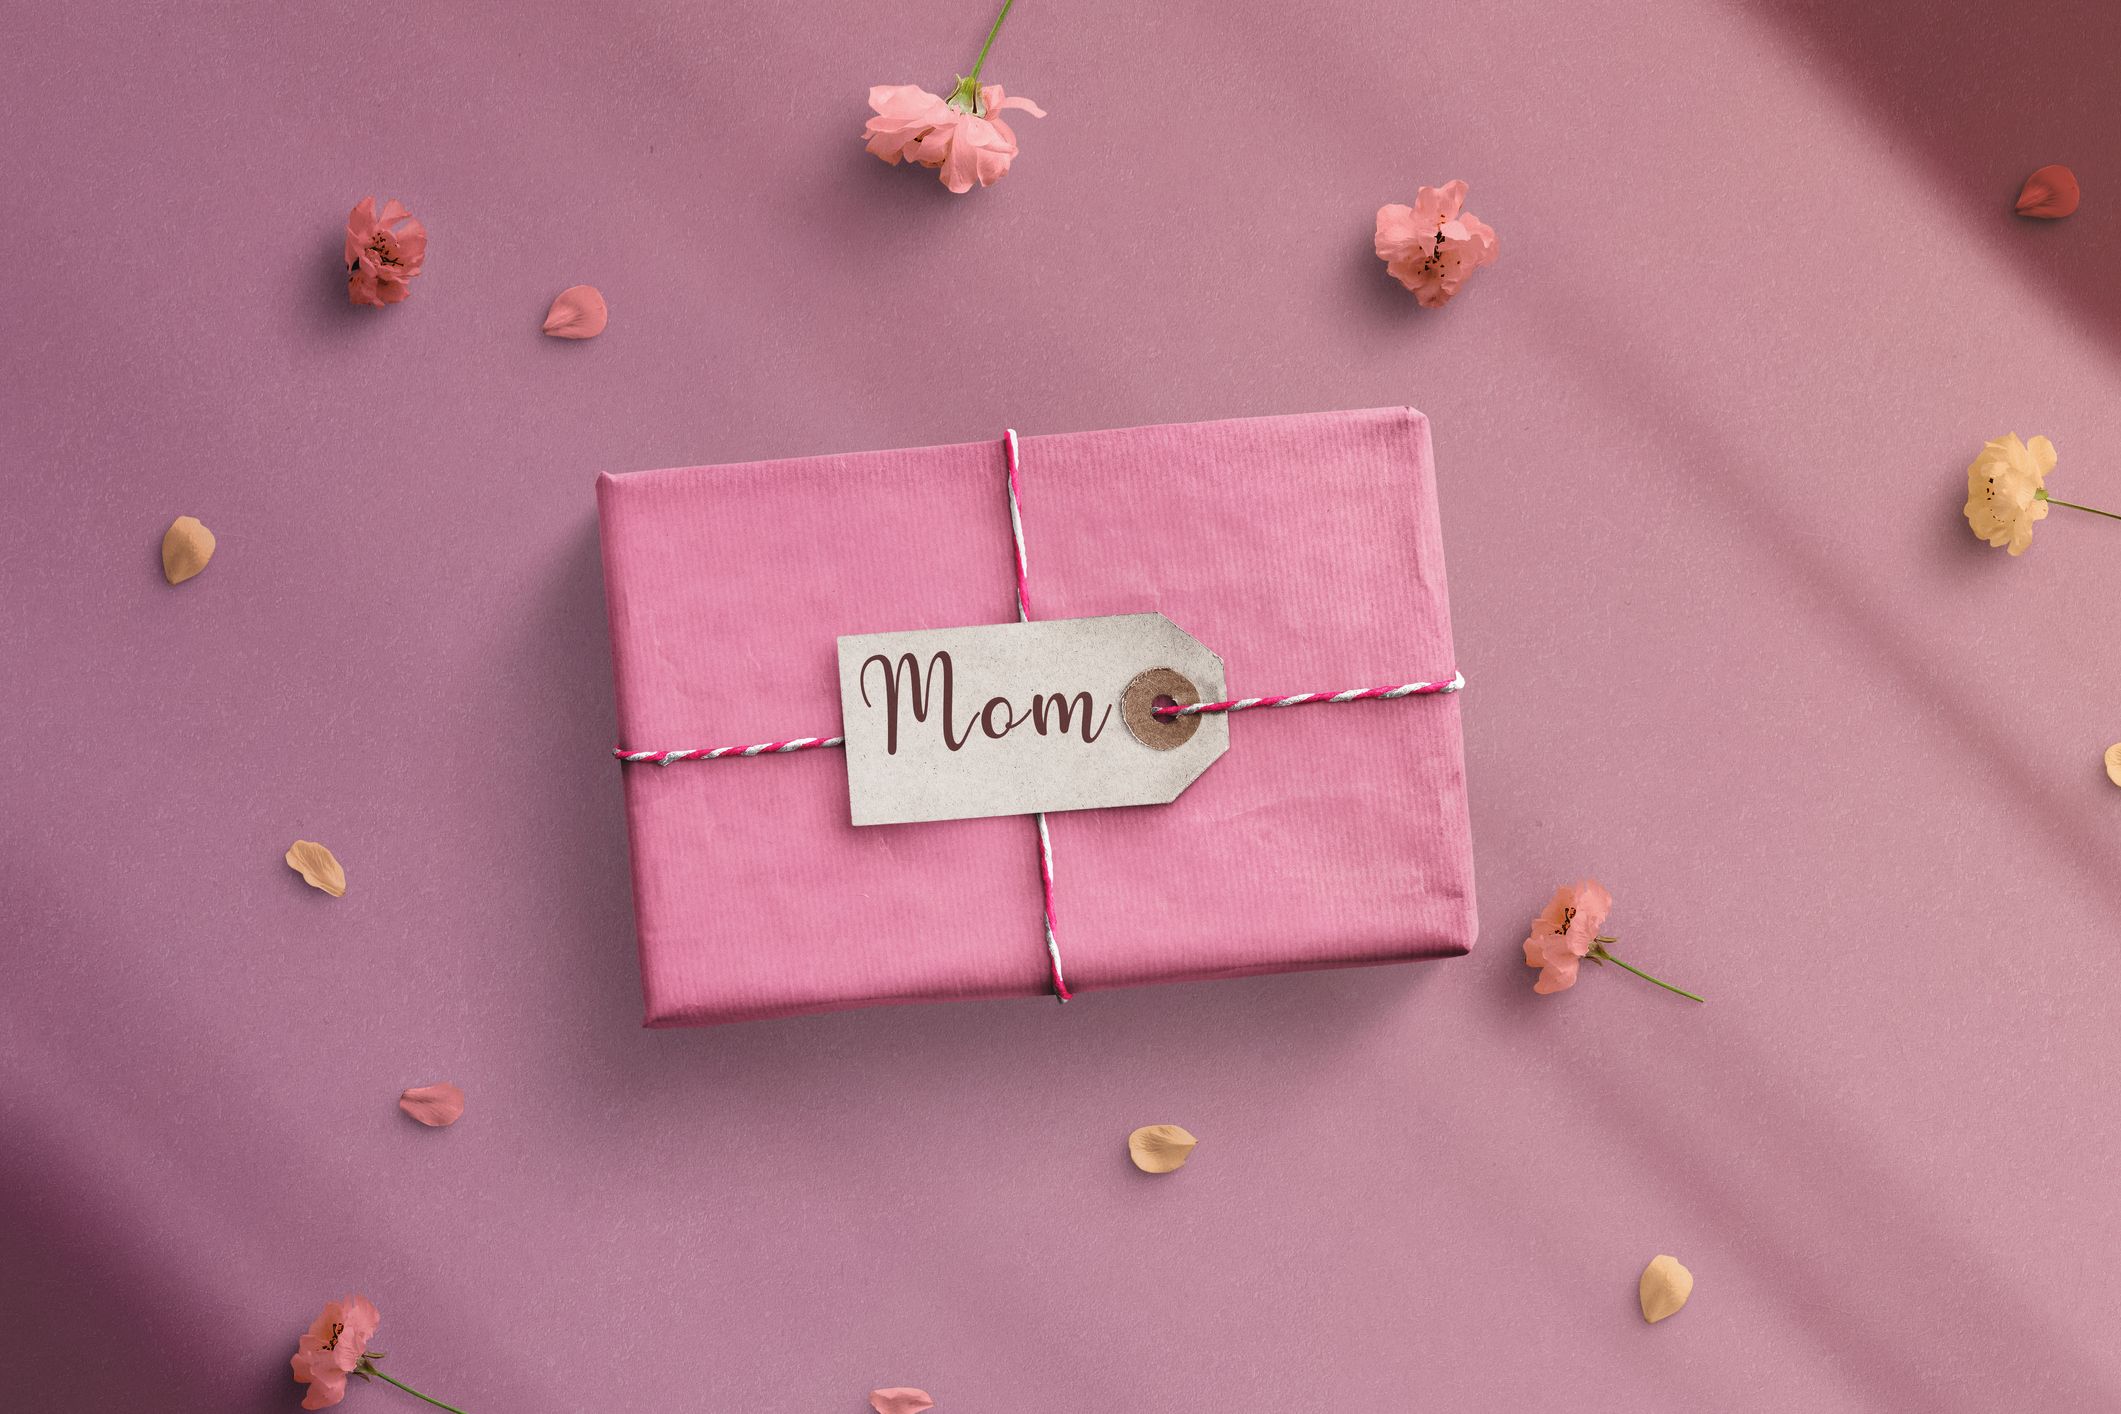 https://hips.hearstapps.com/hmg-prod/images/pink-gift-top-view-mothers-day-text-on-banner-royalty-free-image-1681842010.jpg